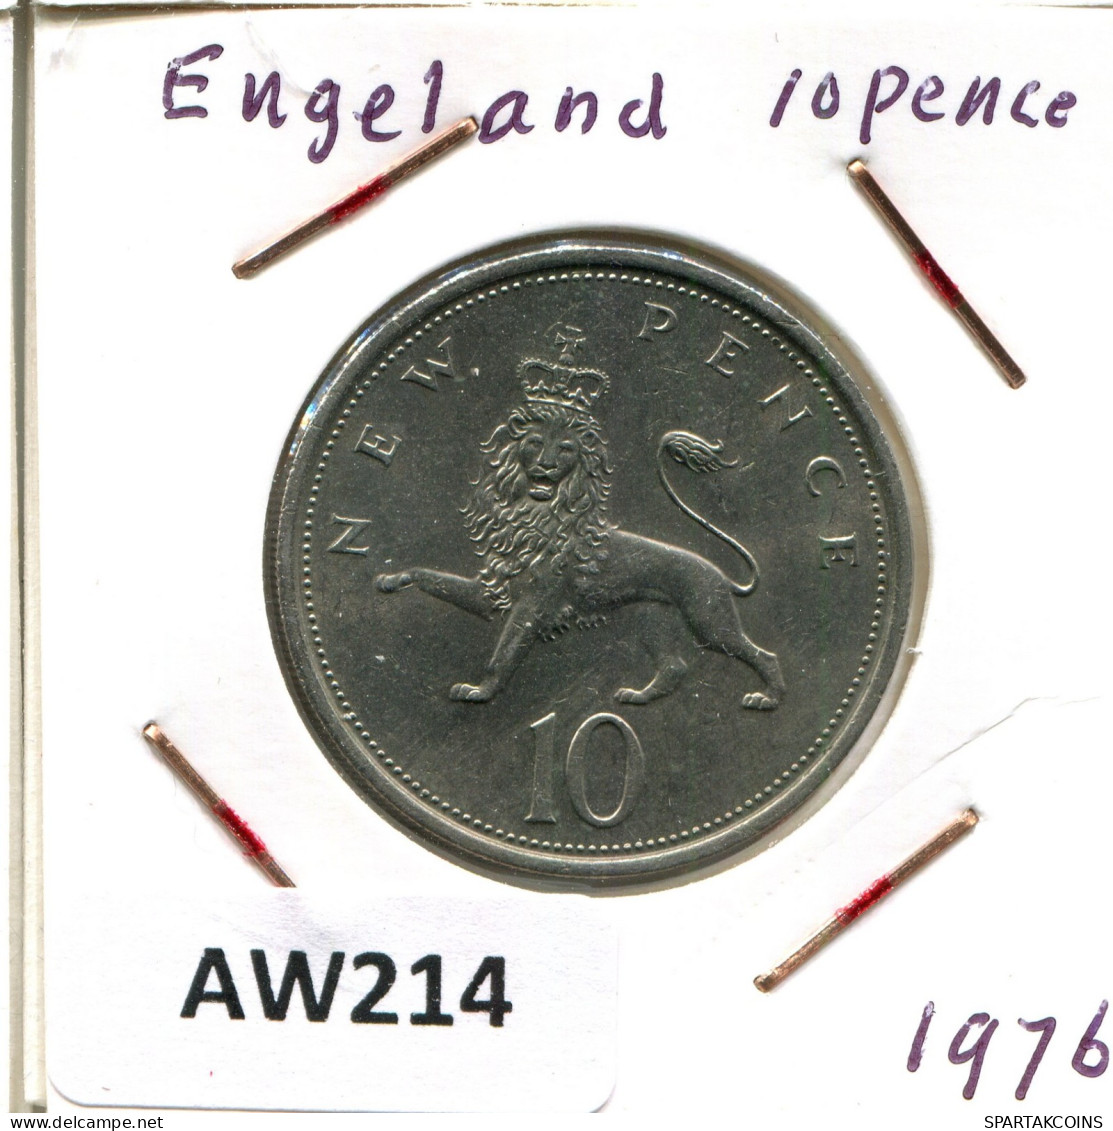 10 PENCE 1976 UK GROßBRITANNIEN GREAT BRITAIN Münze #AW214.D.A - 10 Pence & 10 New Pence